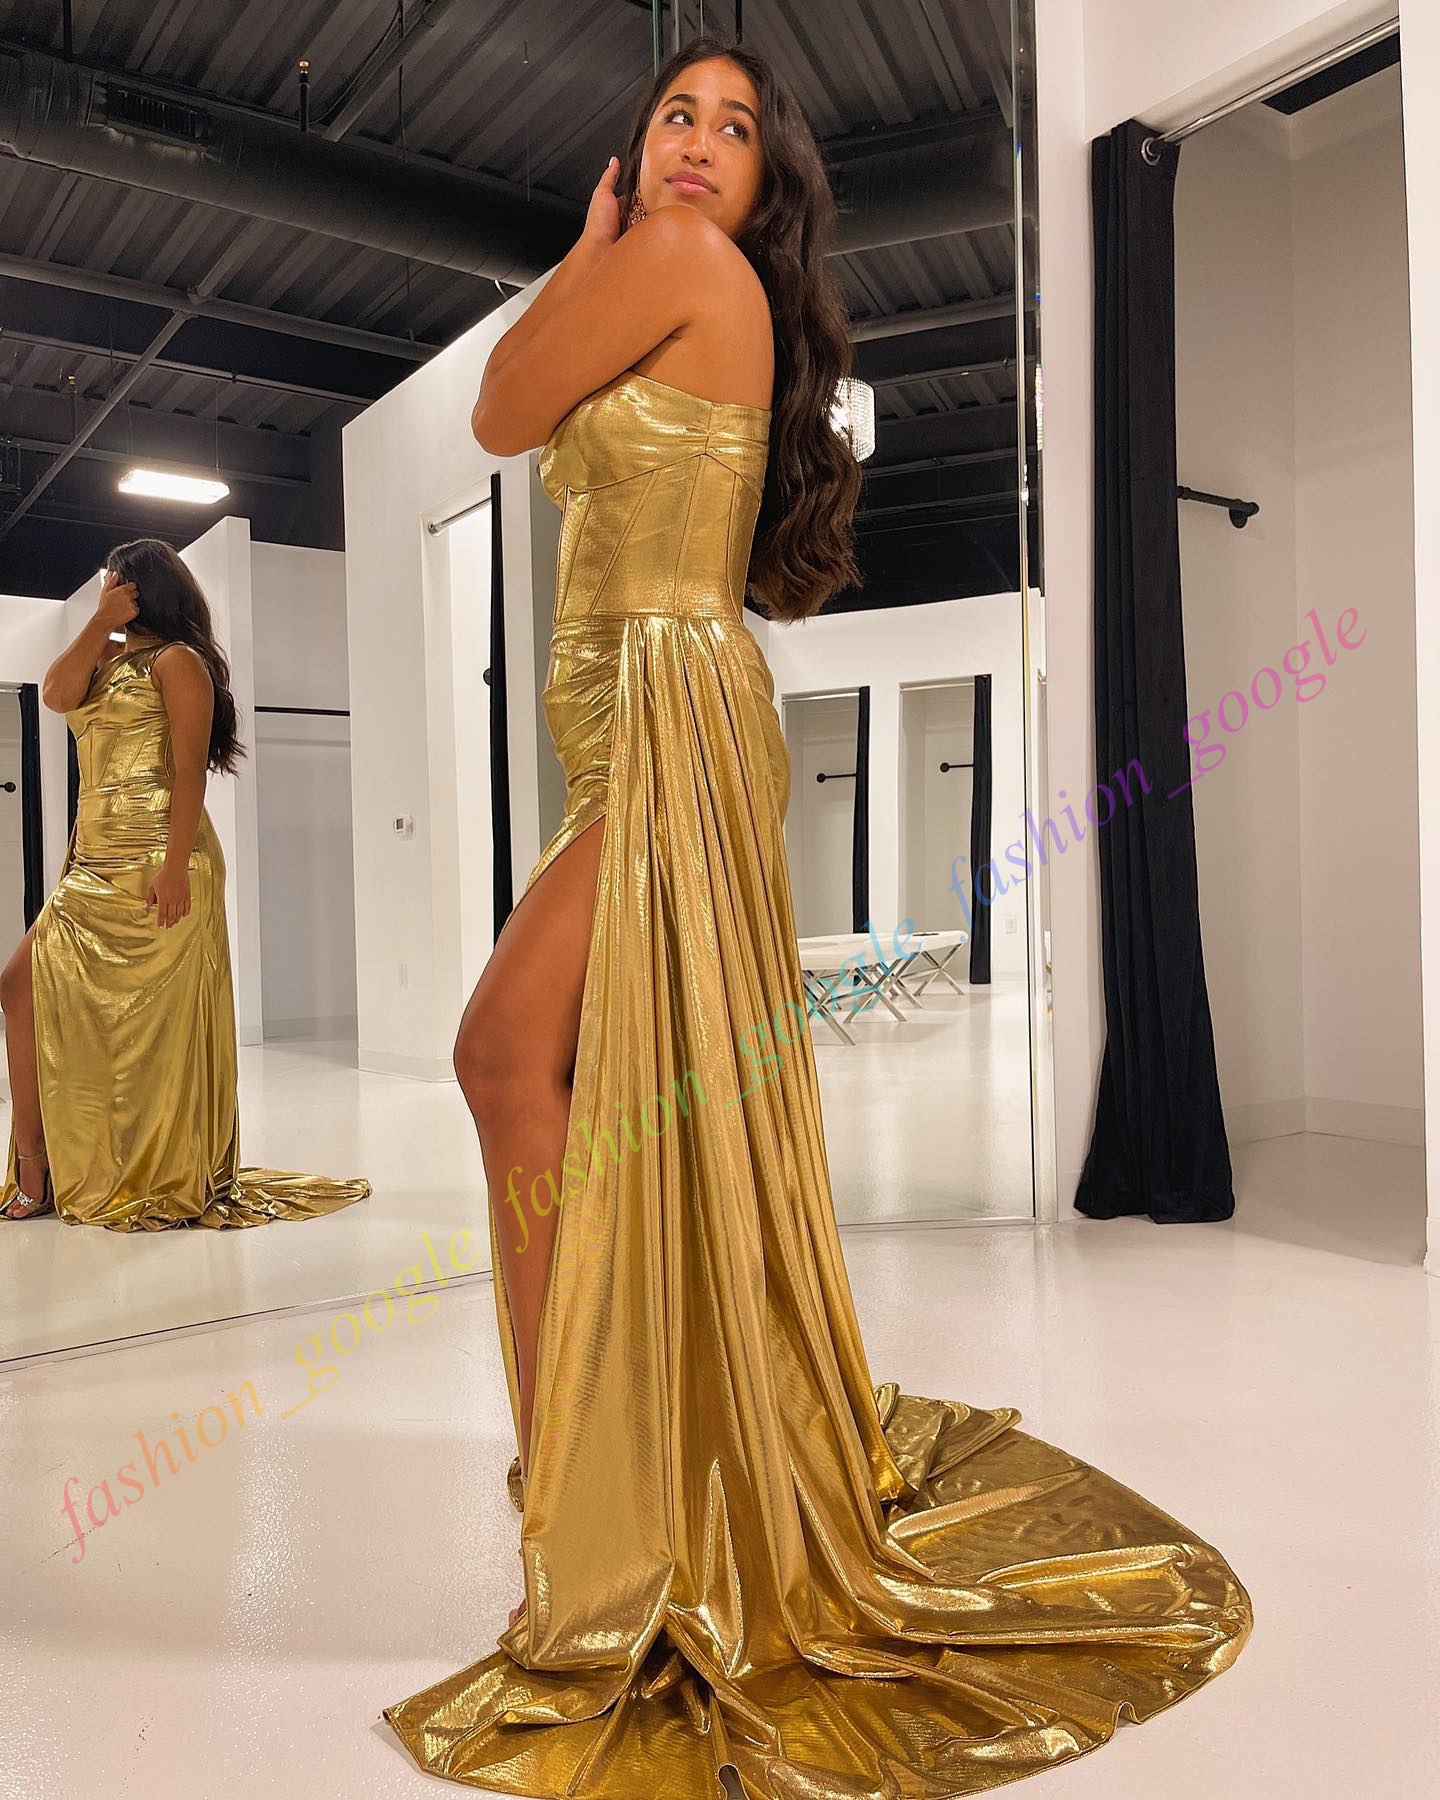 Gold Metallic Prom Dress One-Shulder Fitted Long Winter Formal Event Party Gown Ruched High Slit Silver Royal-Blue Red Carpet Runway Oscar Gala Pageant Side Overlay